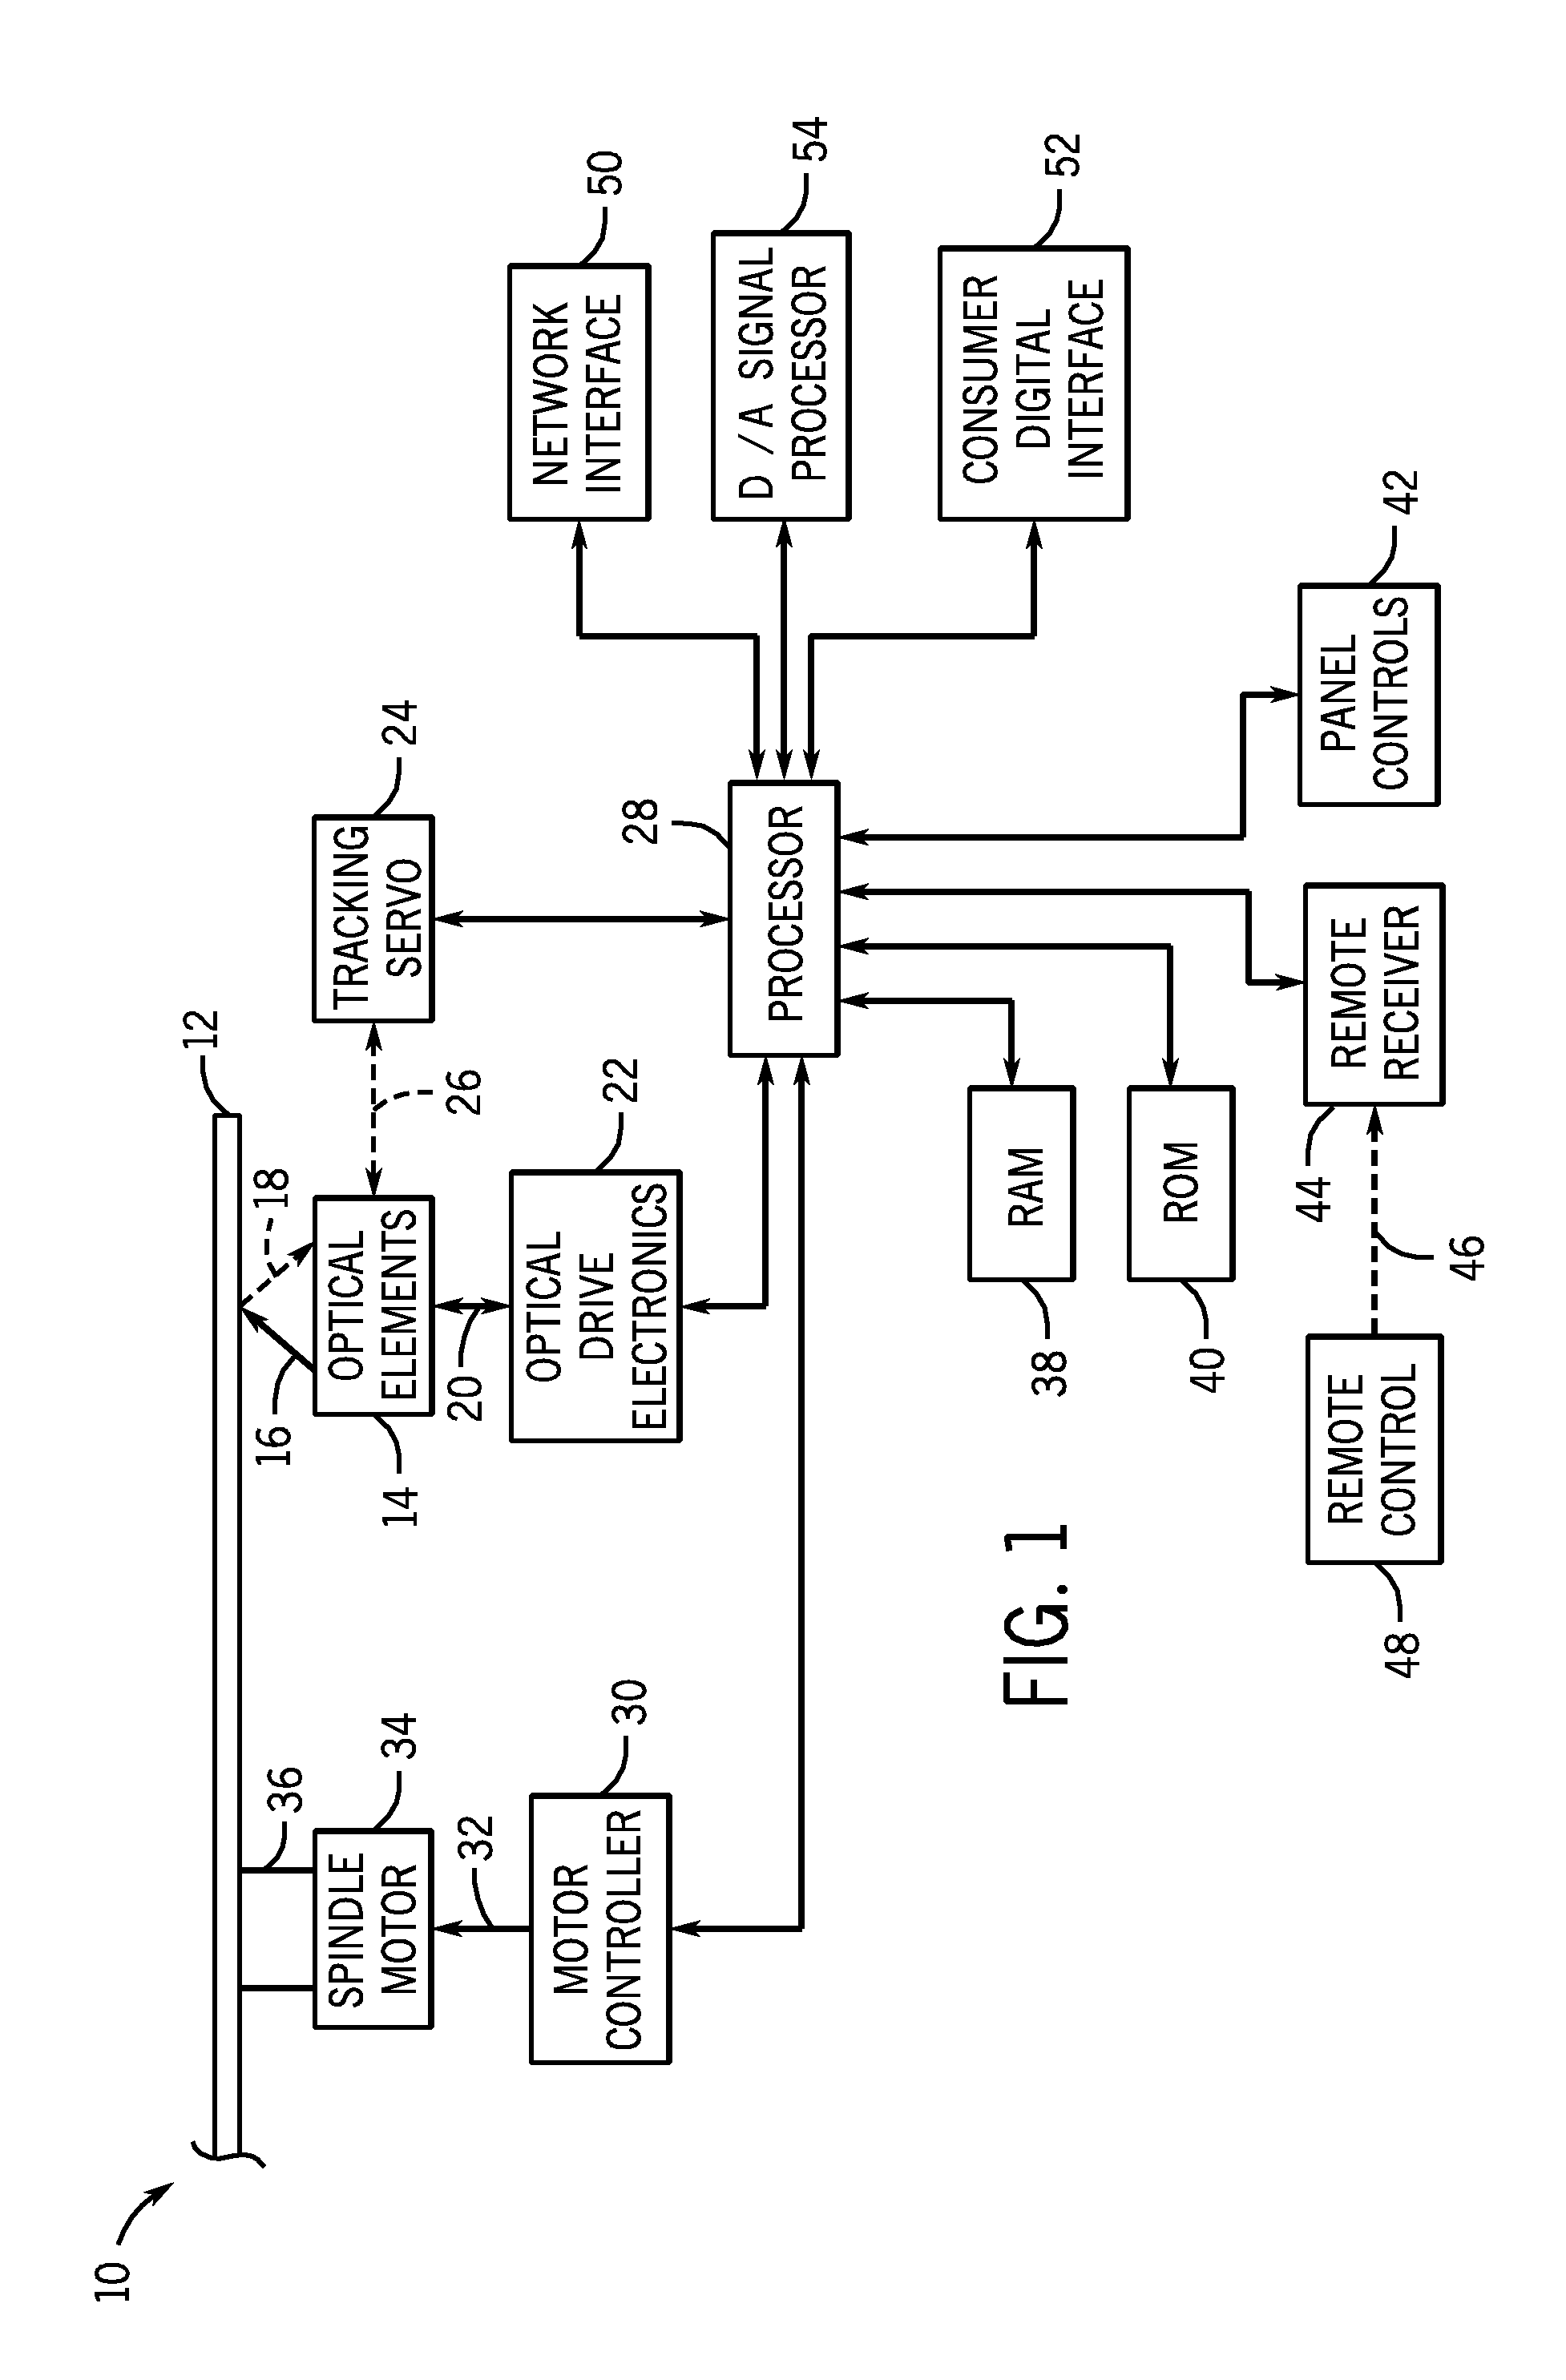 Method for formatting and reading data disks